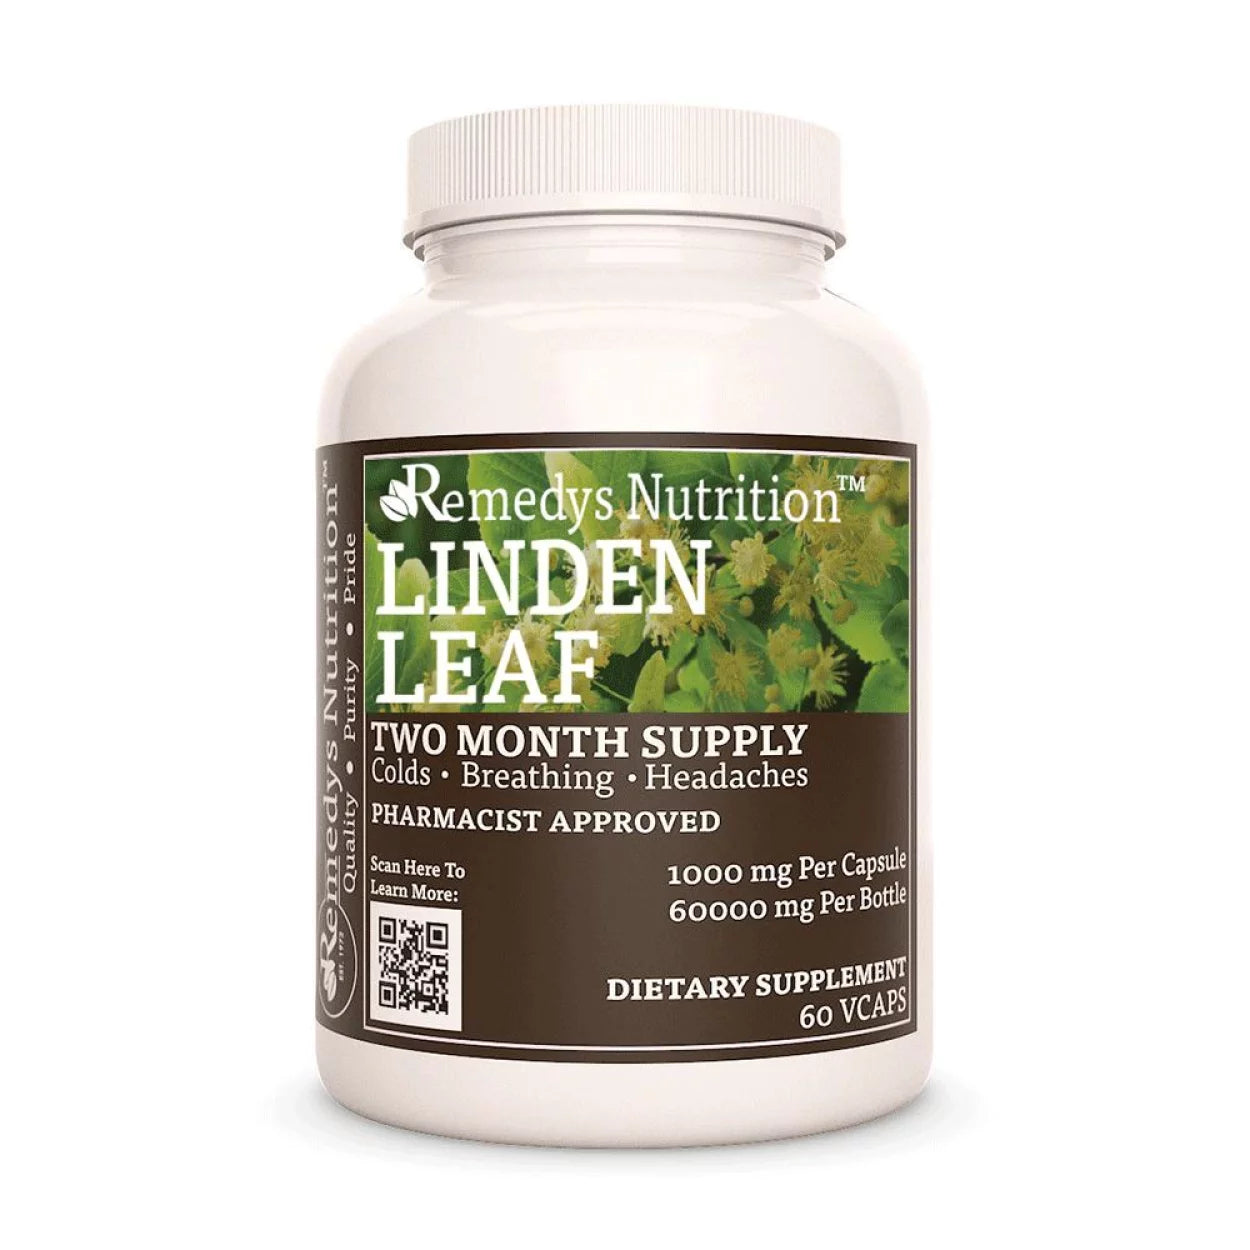 Image of Remedy's Nutrition® Linden Leaf Capsules Herbal Dietary Supplement front bottle. Made in the USA. Tilia cordata.